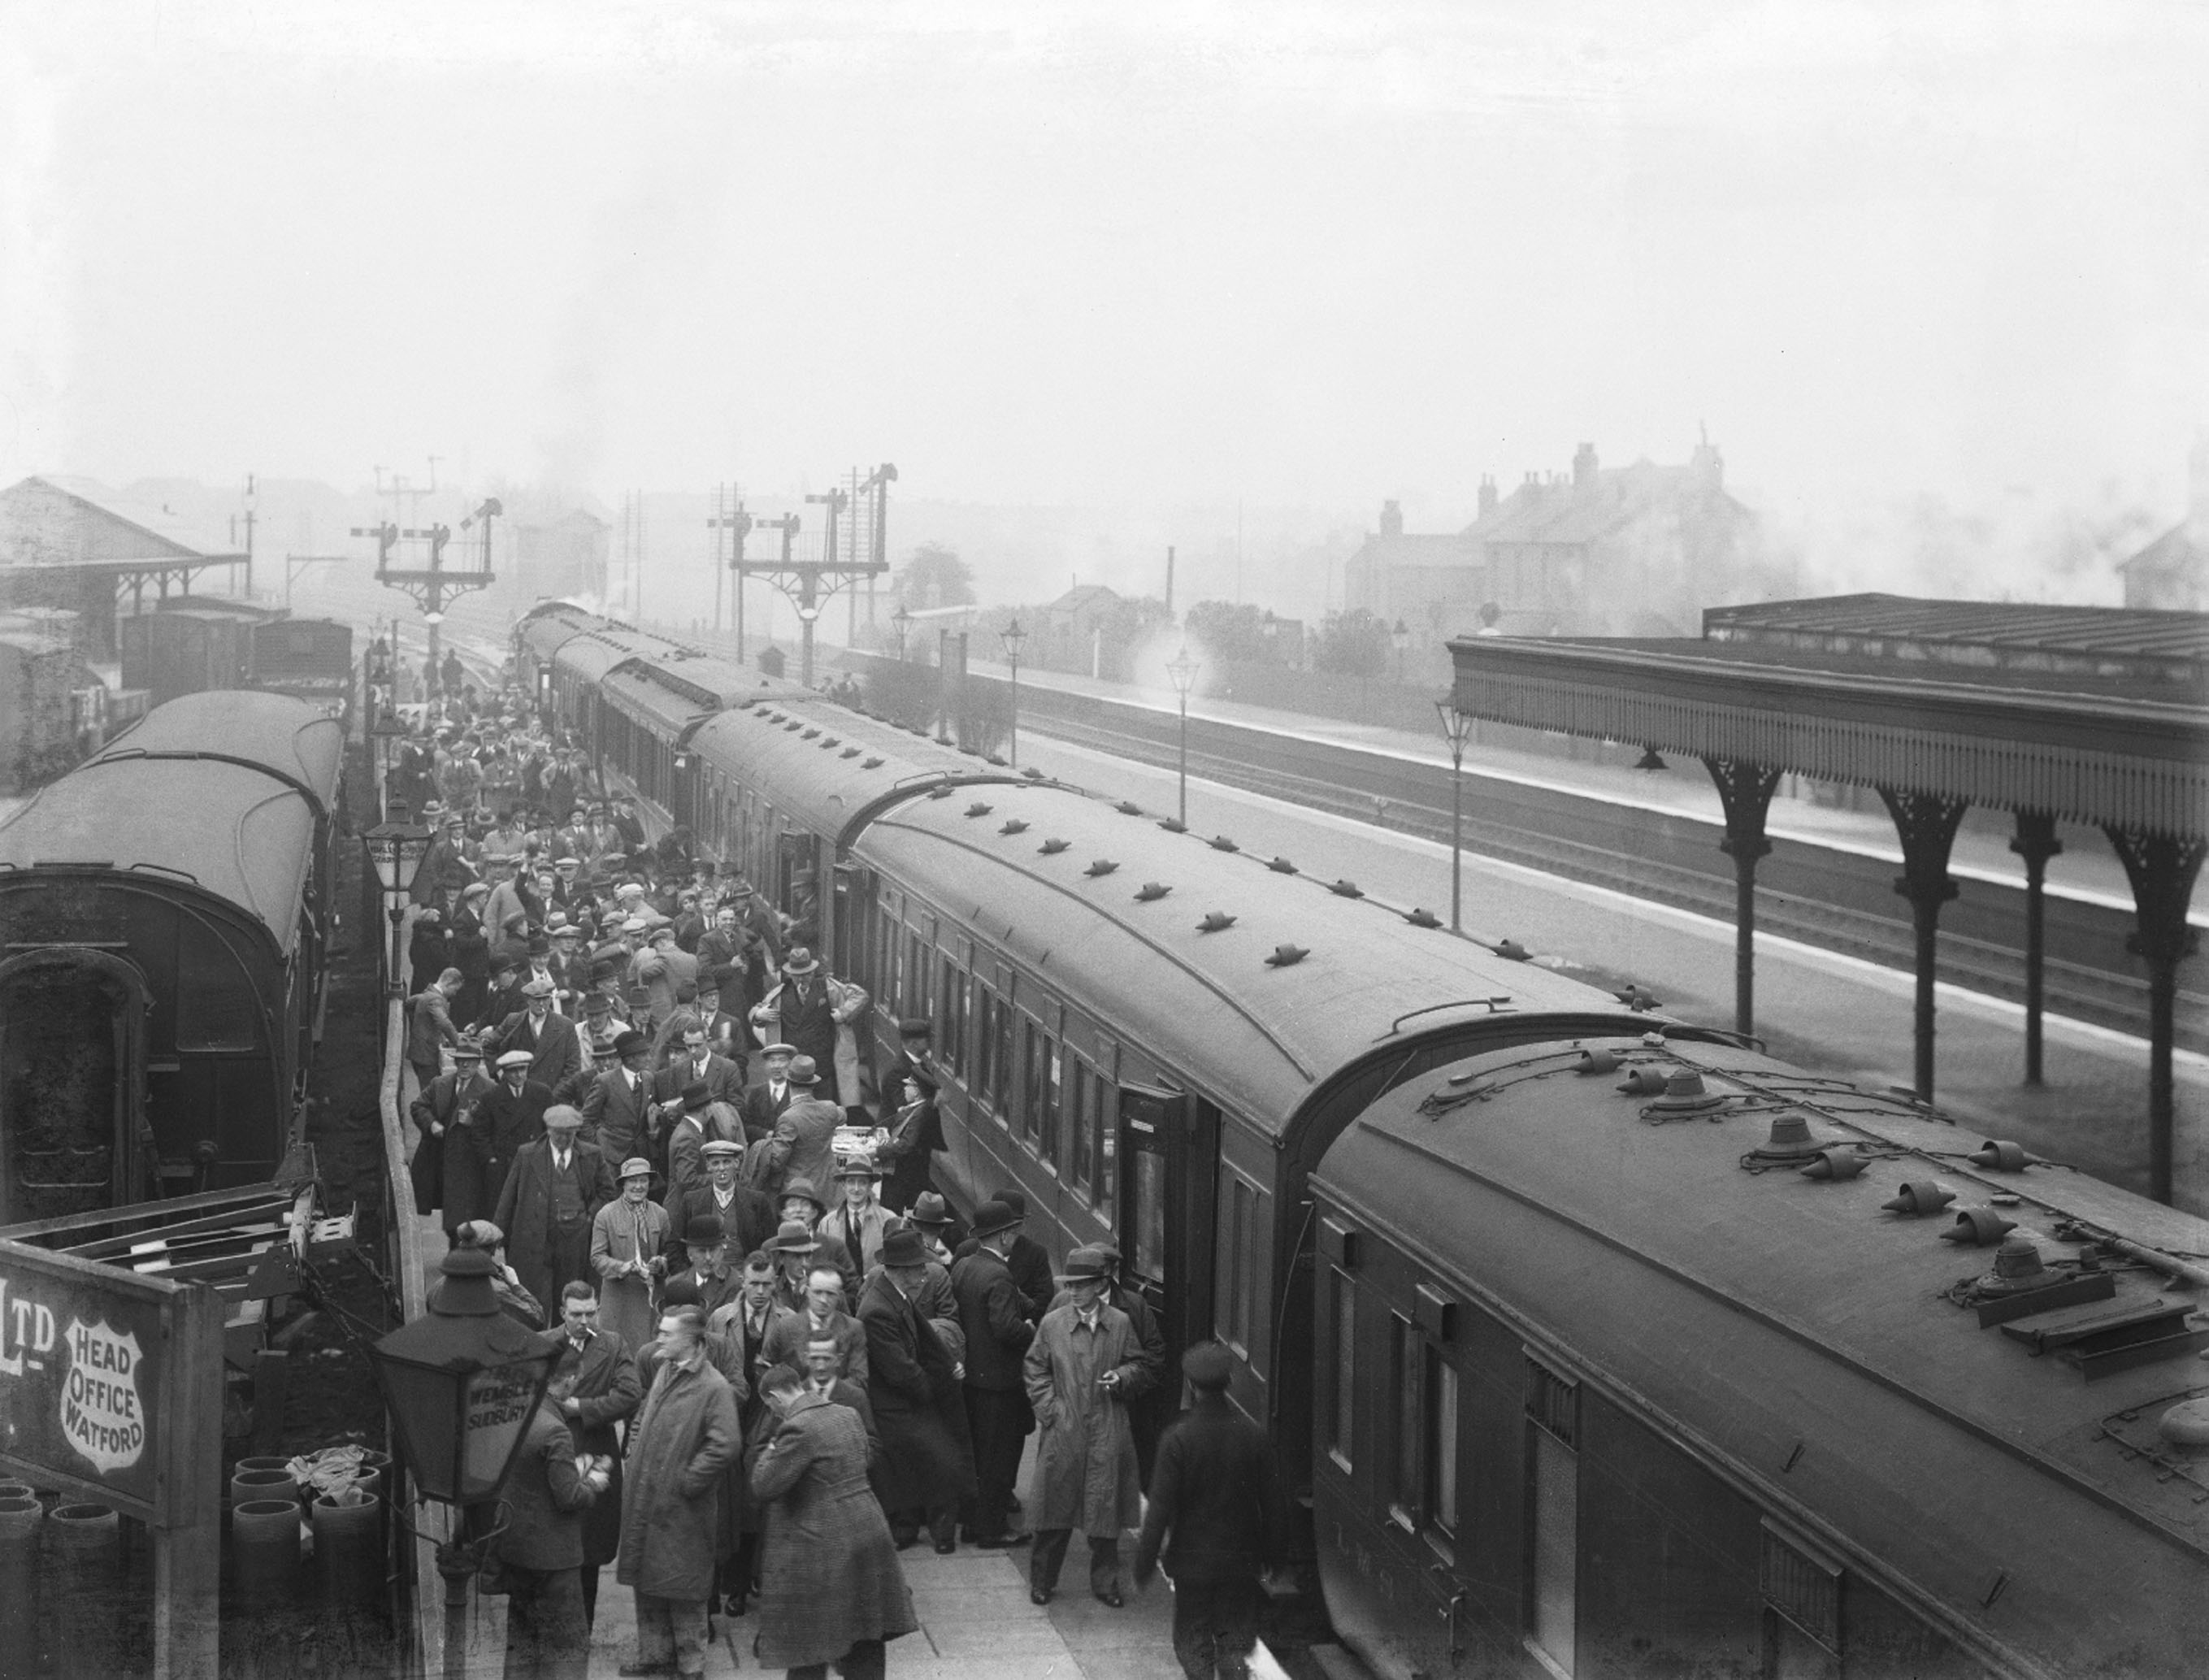 Fans take the train to cup glory, at the new Wembly sation. 